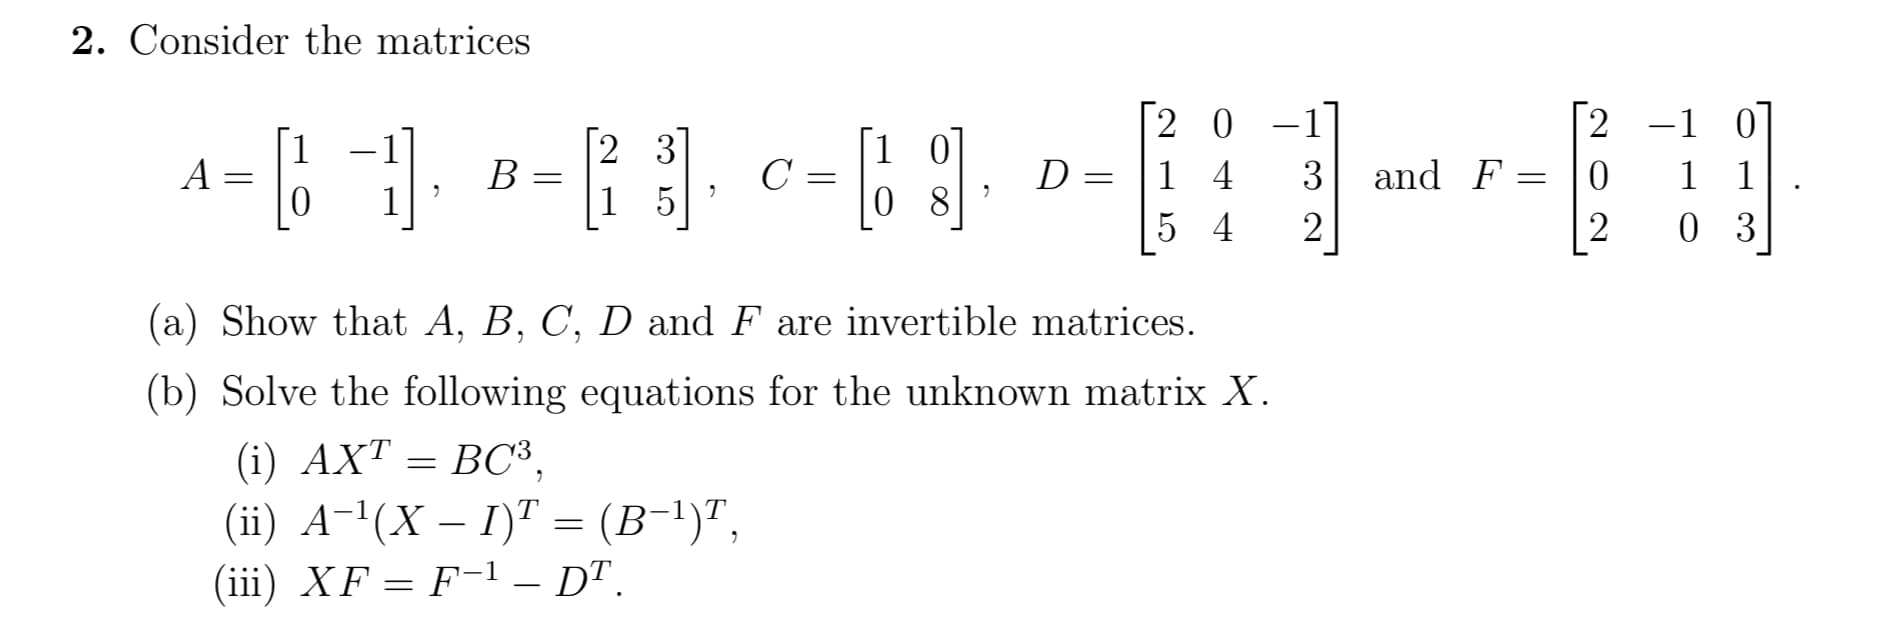 Consider the matrices
2 0 -1
1 4
[2
-1 0
1 1
0 3
1
A
2 3
В
1 5
|1 0
C =
0 8
3
and F
5 4
2
(a) Show that A, B, C, D and F are invertible matrices.
(b) Solve the following equations for the unknown matrix X.
(i) AXT = BC³,
ВС,
(ii) A-!(X – I)" = (B-1)",
